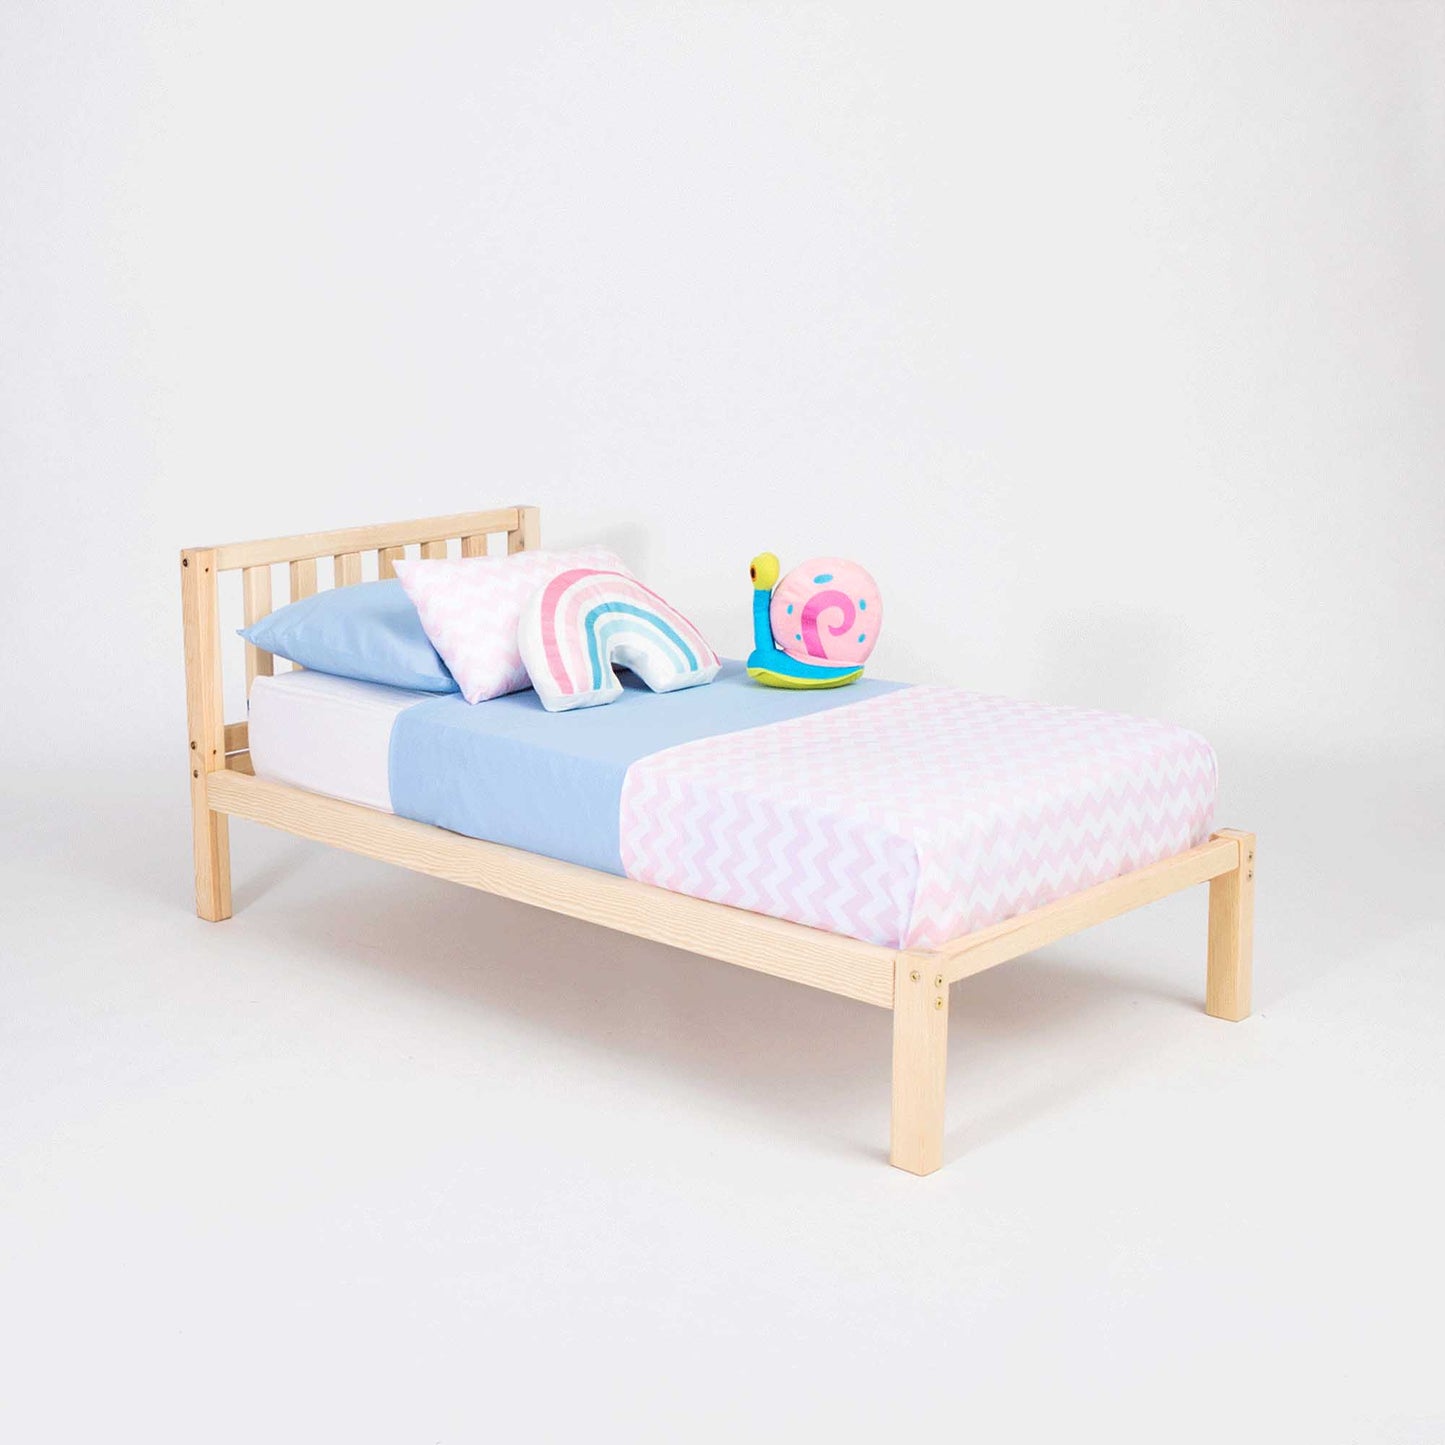 A Sweet Home From Wood Montessori-inspired wooden bed for children, promoting independence with a touch of whimsy thanks to its pink and blue pillow.